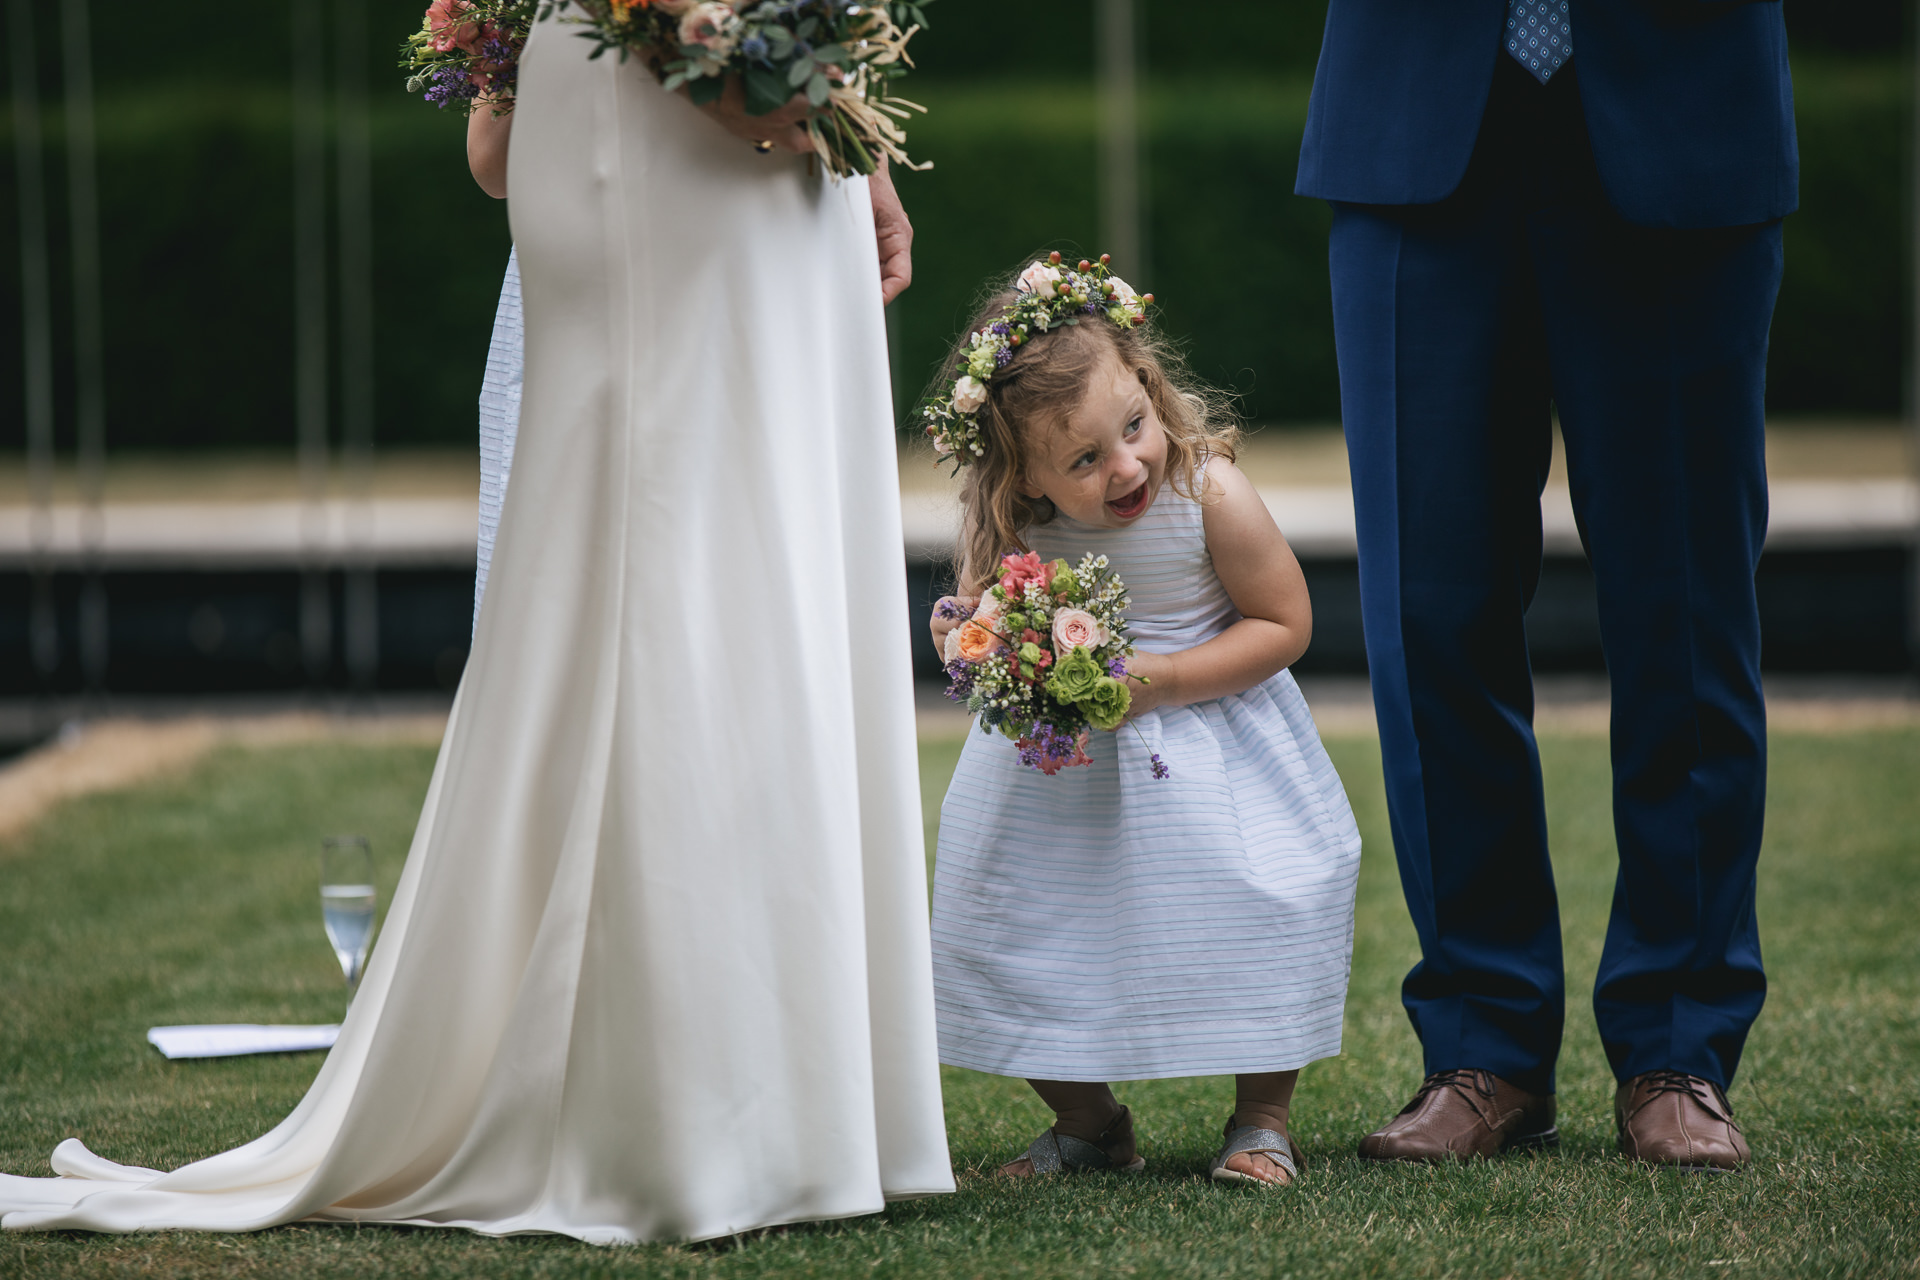 Flower girl pulling faces during wedding ceremony